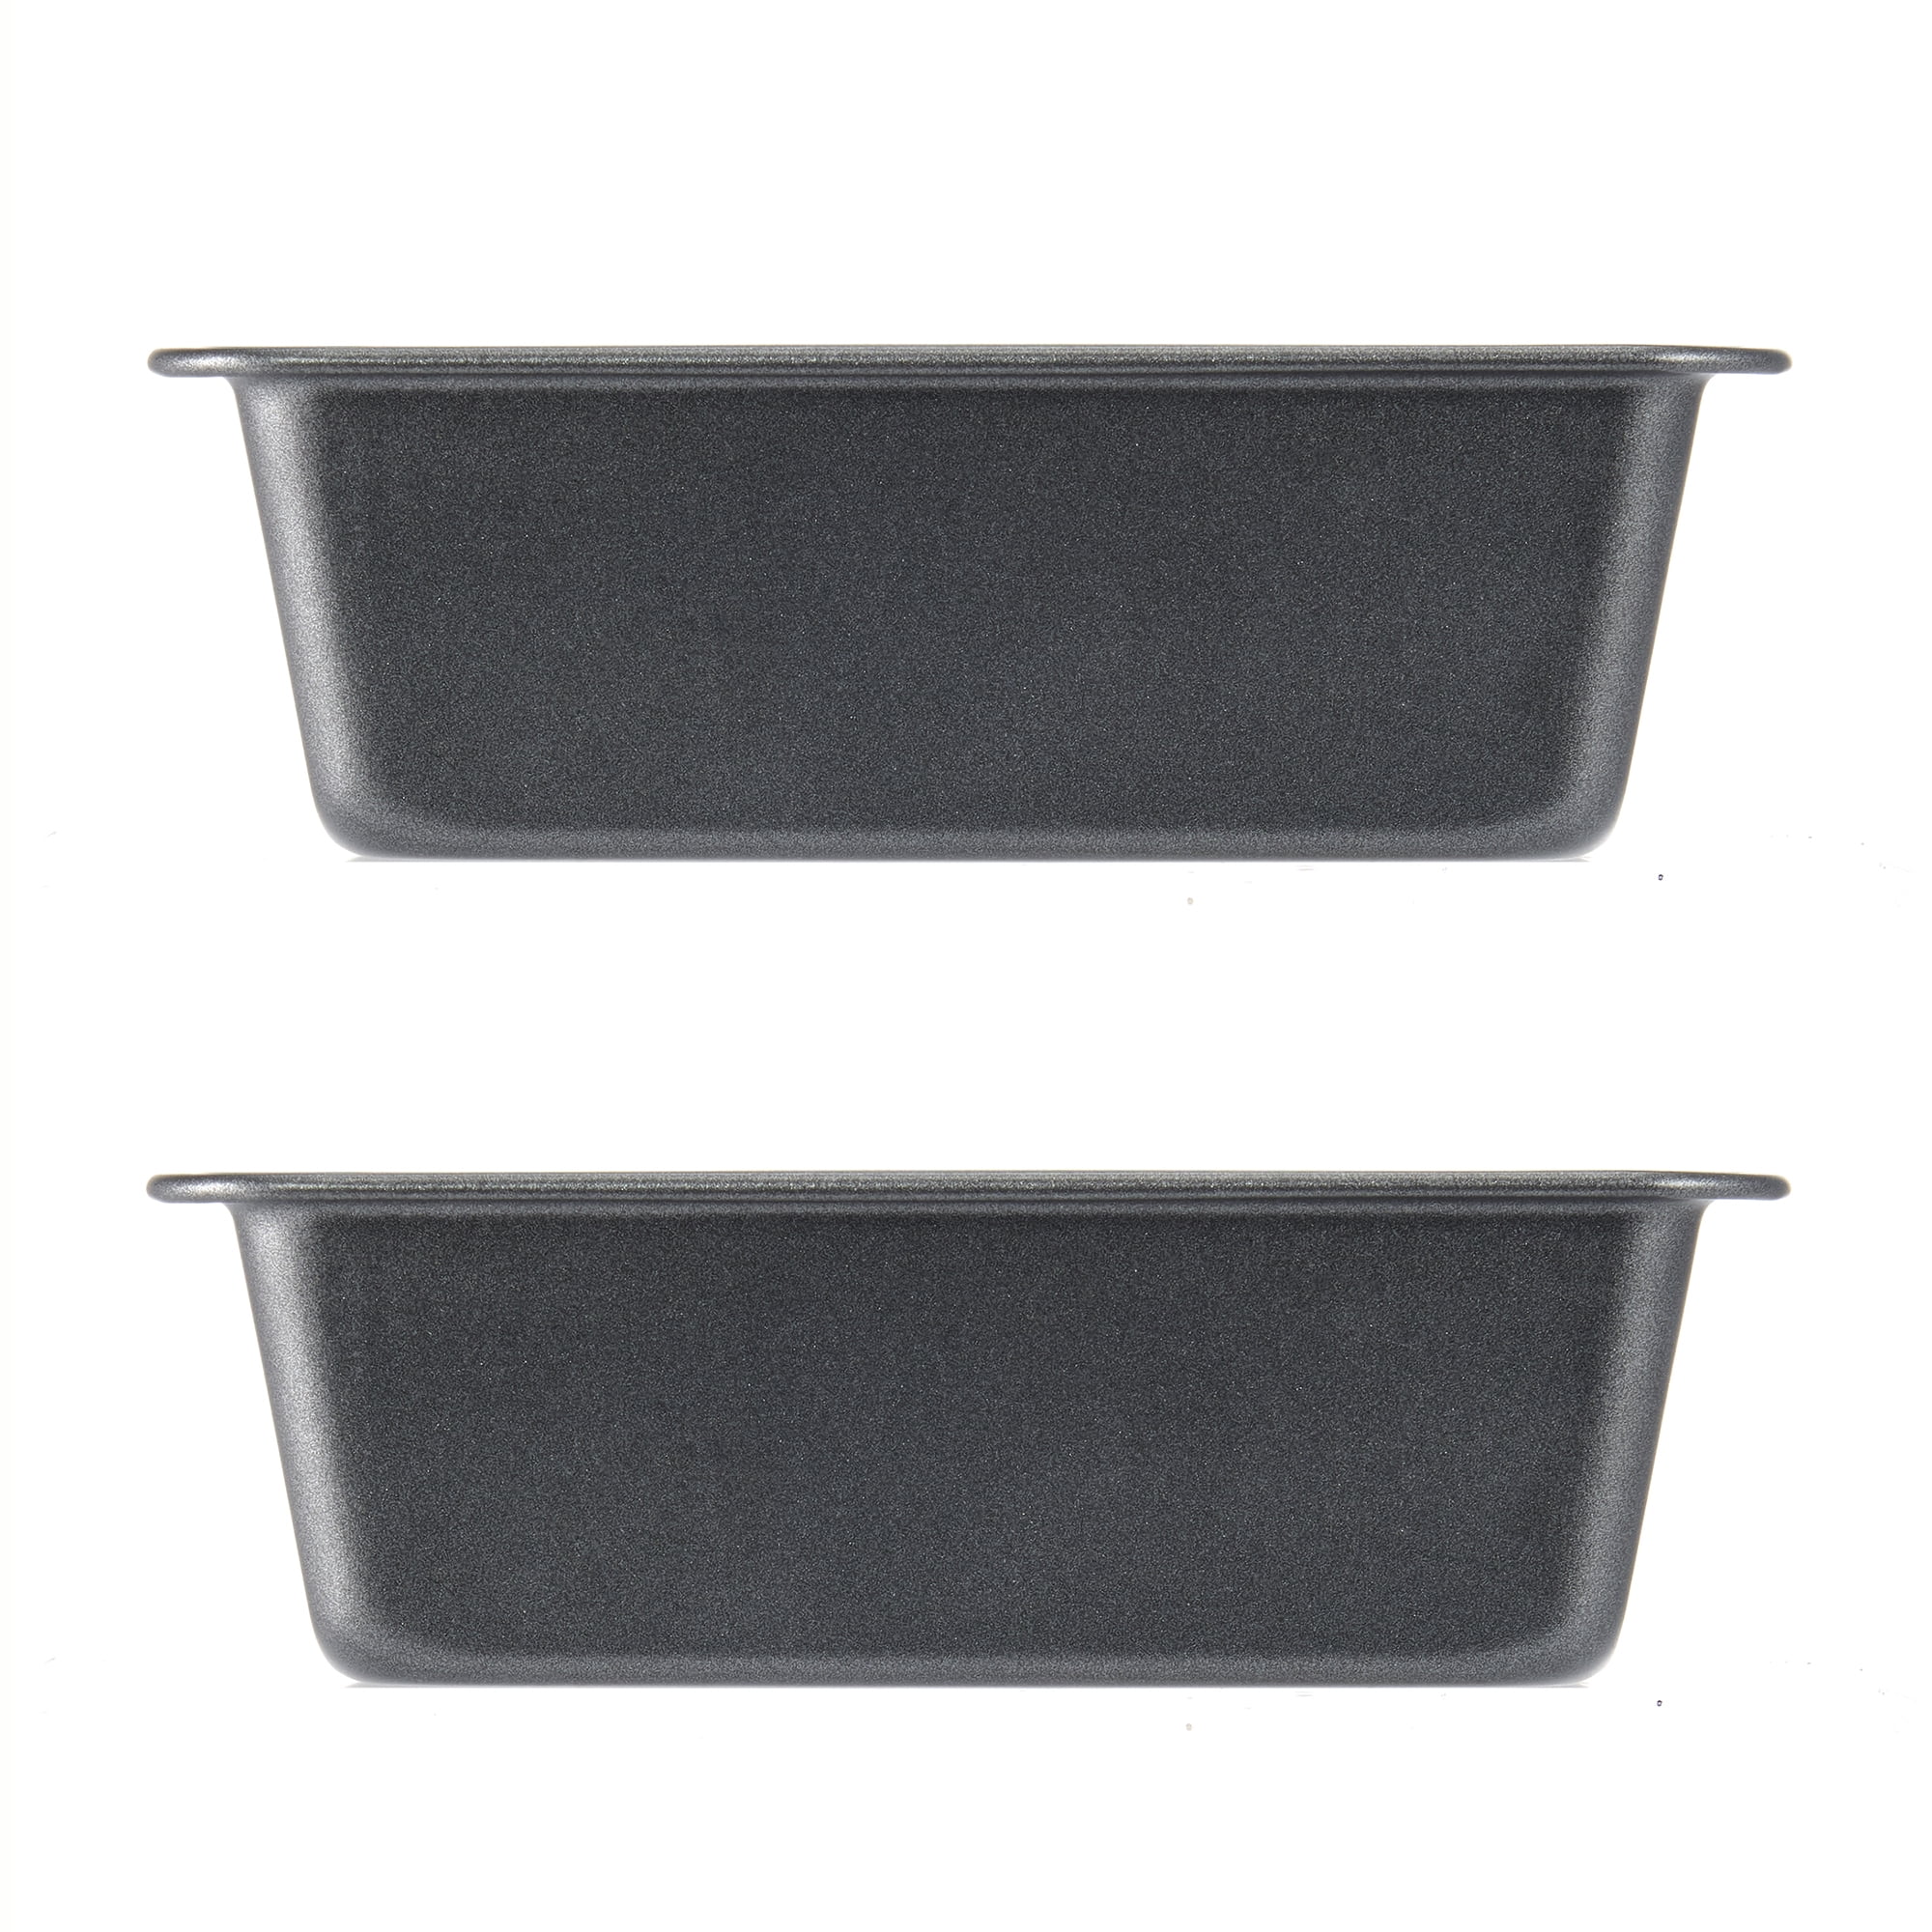  SILIVO 4 Pack Mini Loaf Pans, 5.7x2.5x2.2 inch